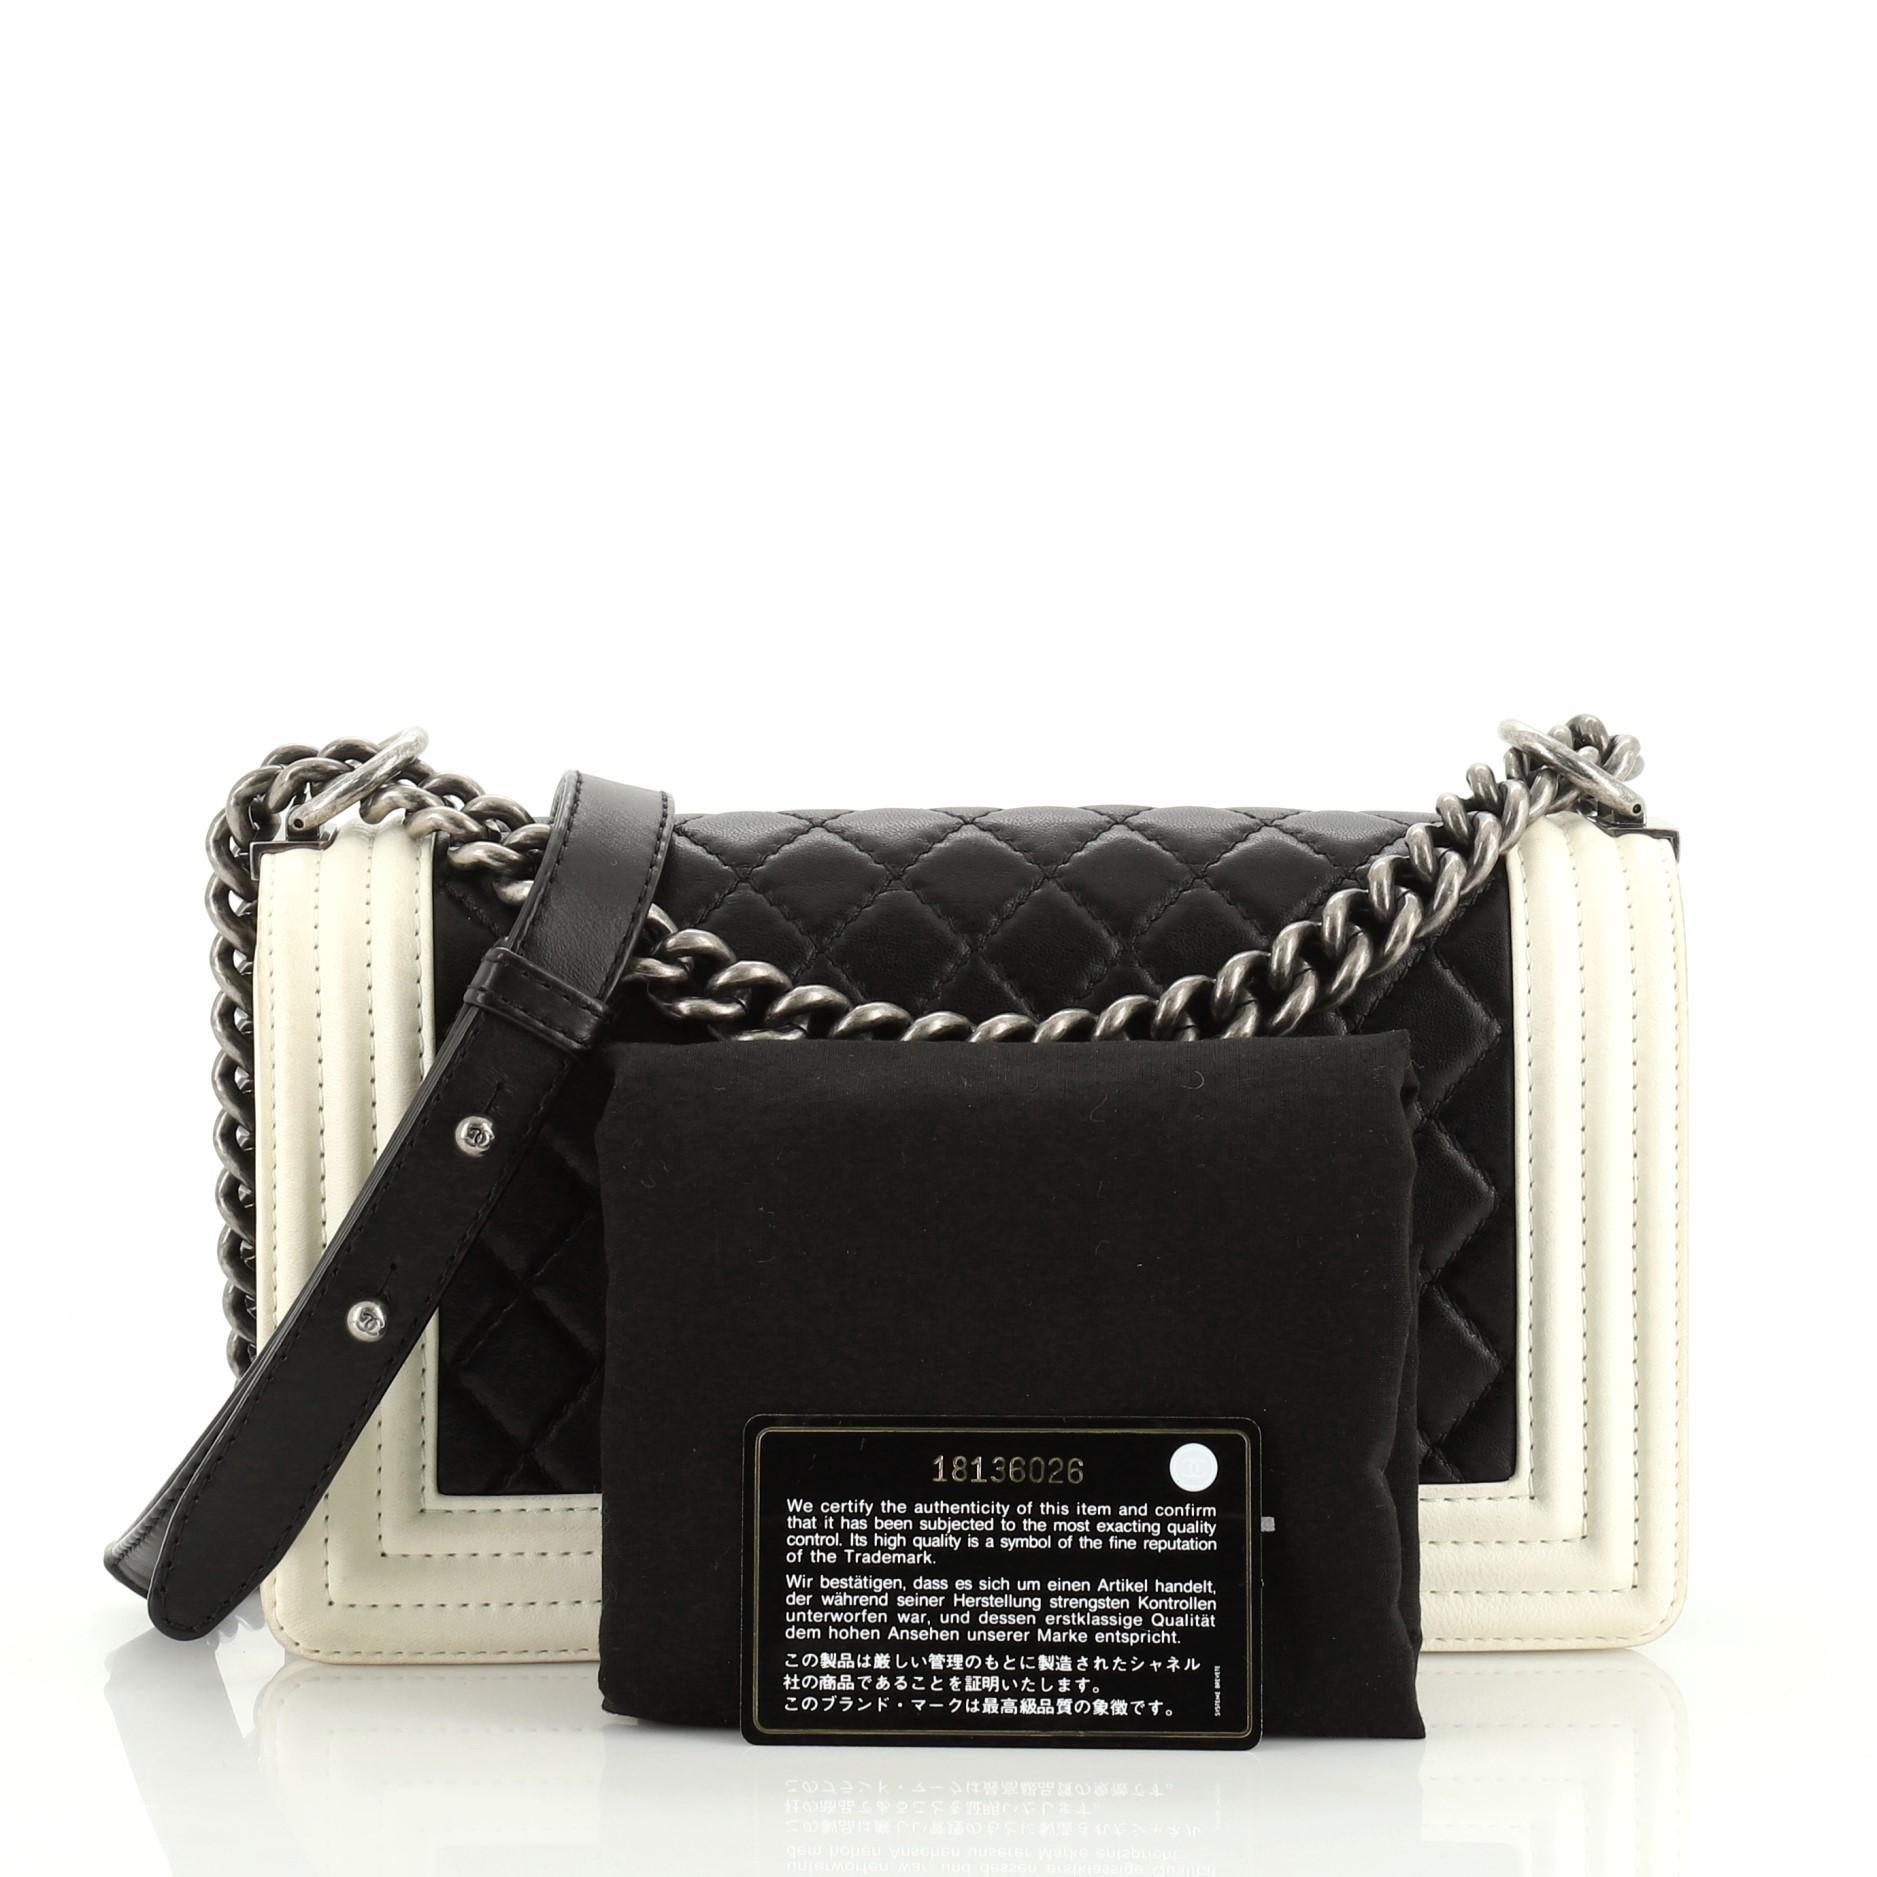 This Chanel Bicolor Boy Flap Bag Quilted Calfskin Old Medium, crafted from black calfskin leather, features chain link strap with adjustable leather strap and aged silver-tone hardware. Its CC boy push-lock closure opens to a white nylon interior